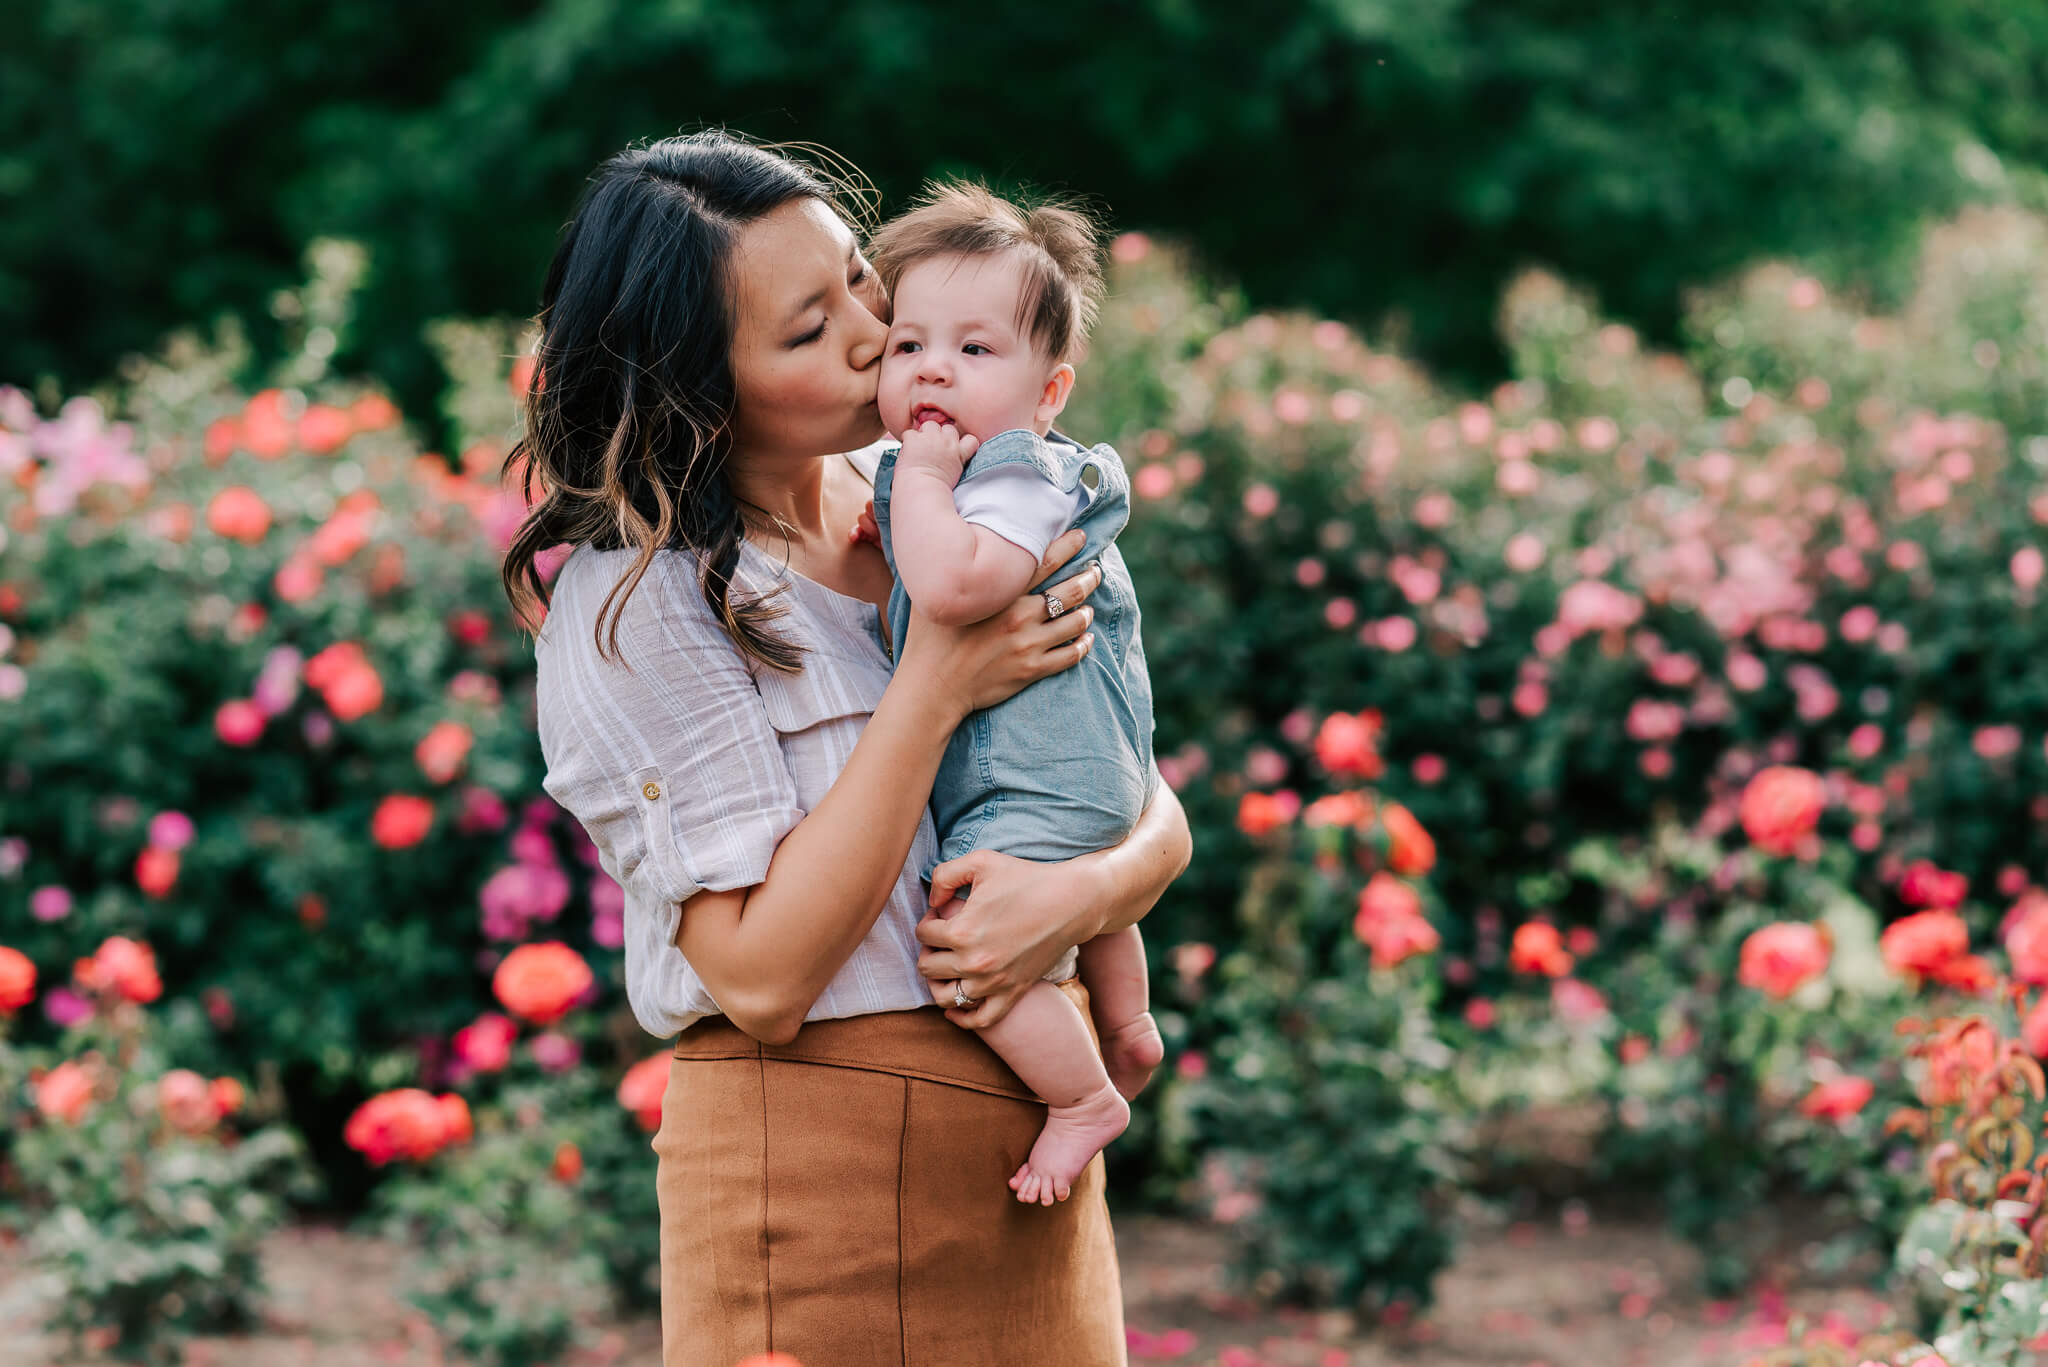 A mother in a tan skirt and grey top kisses the cheek of her infant baby in blue overalls while standing in a rose garden centreville obgyn